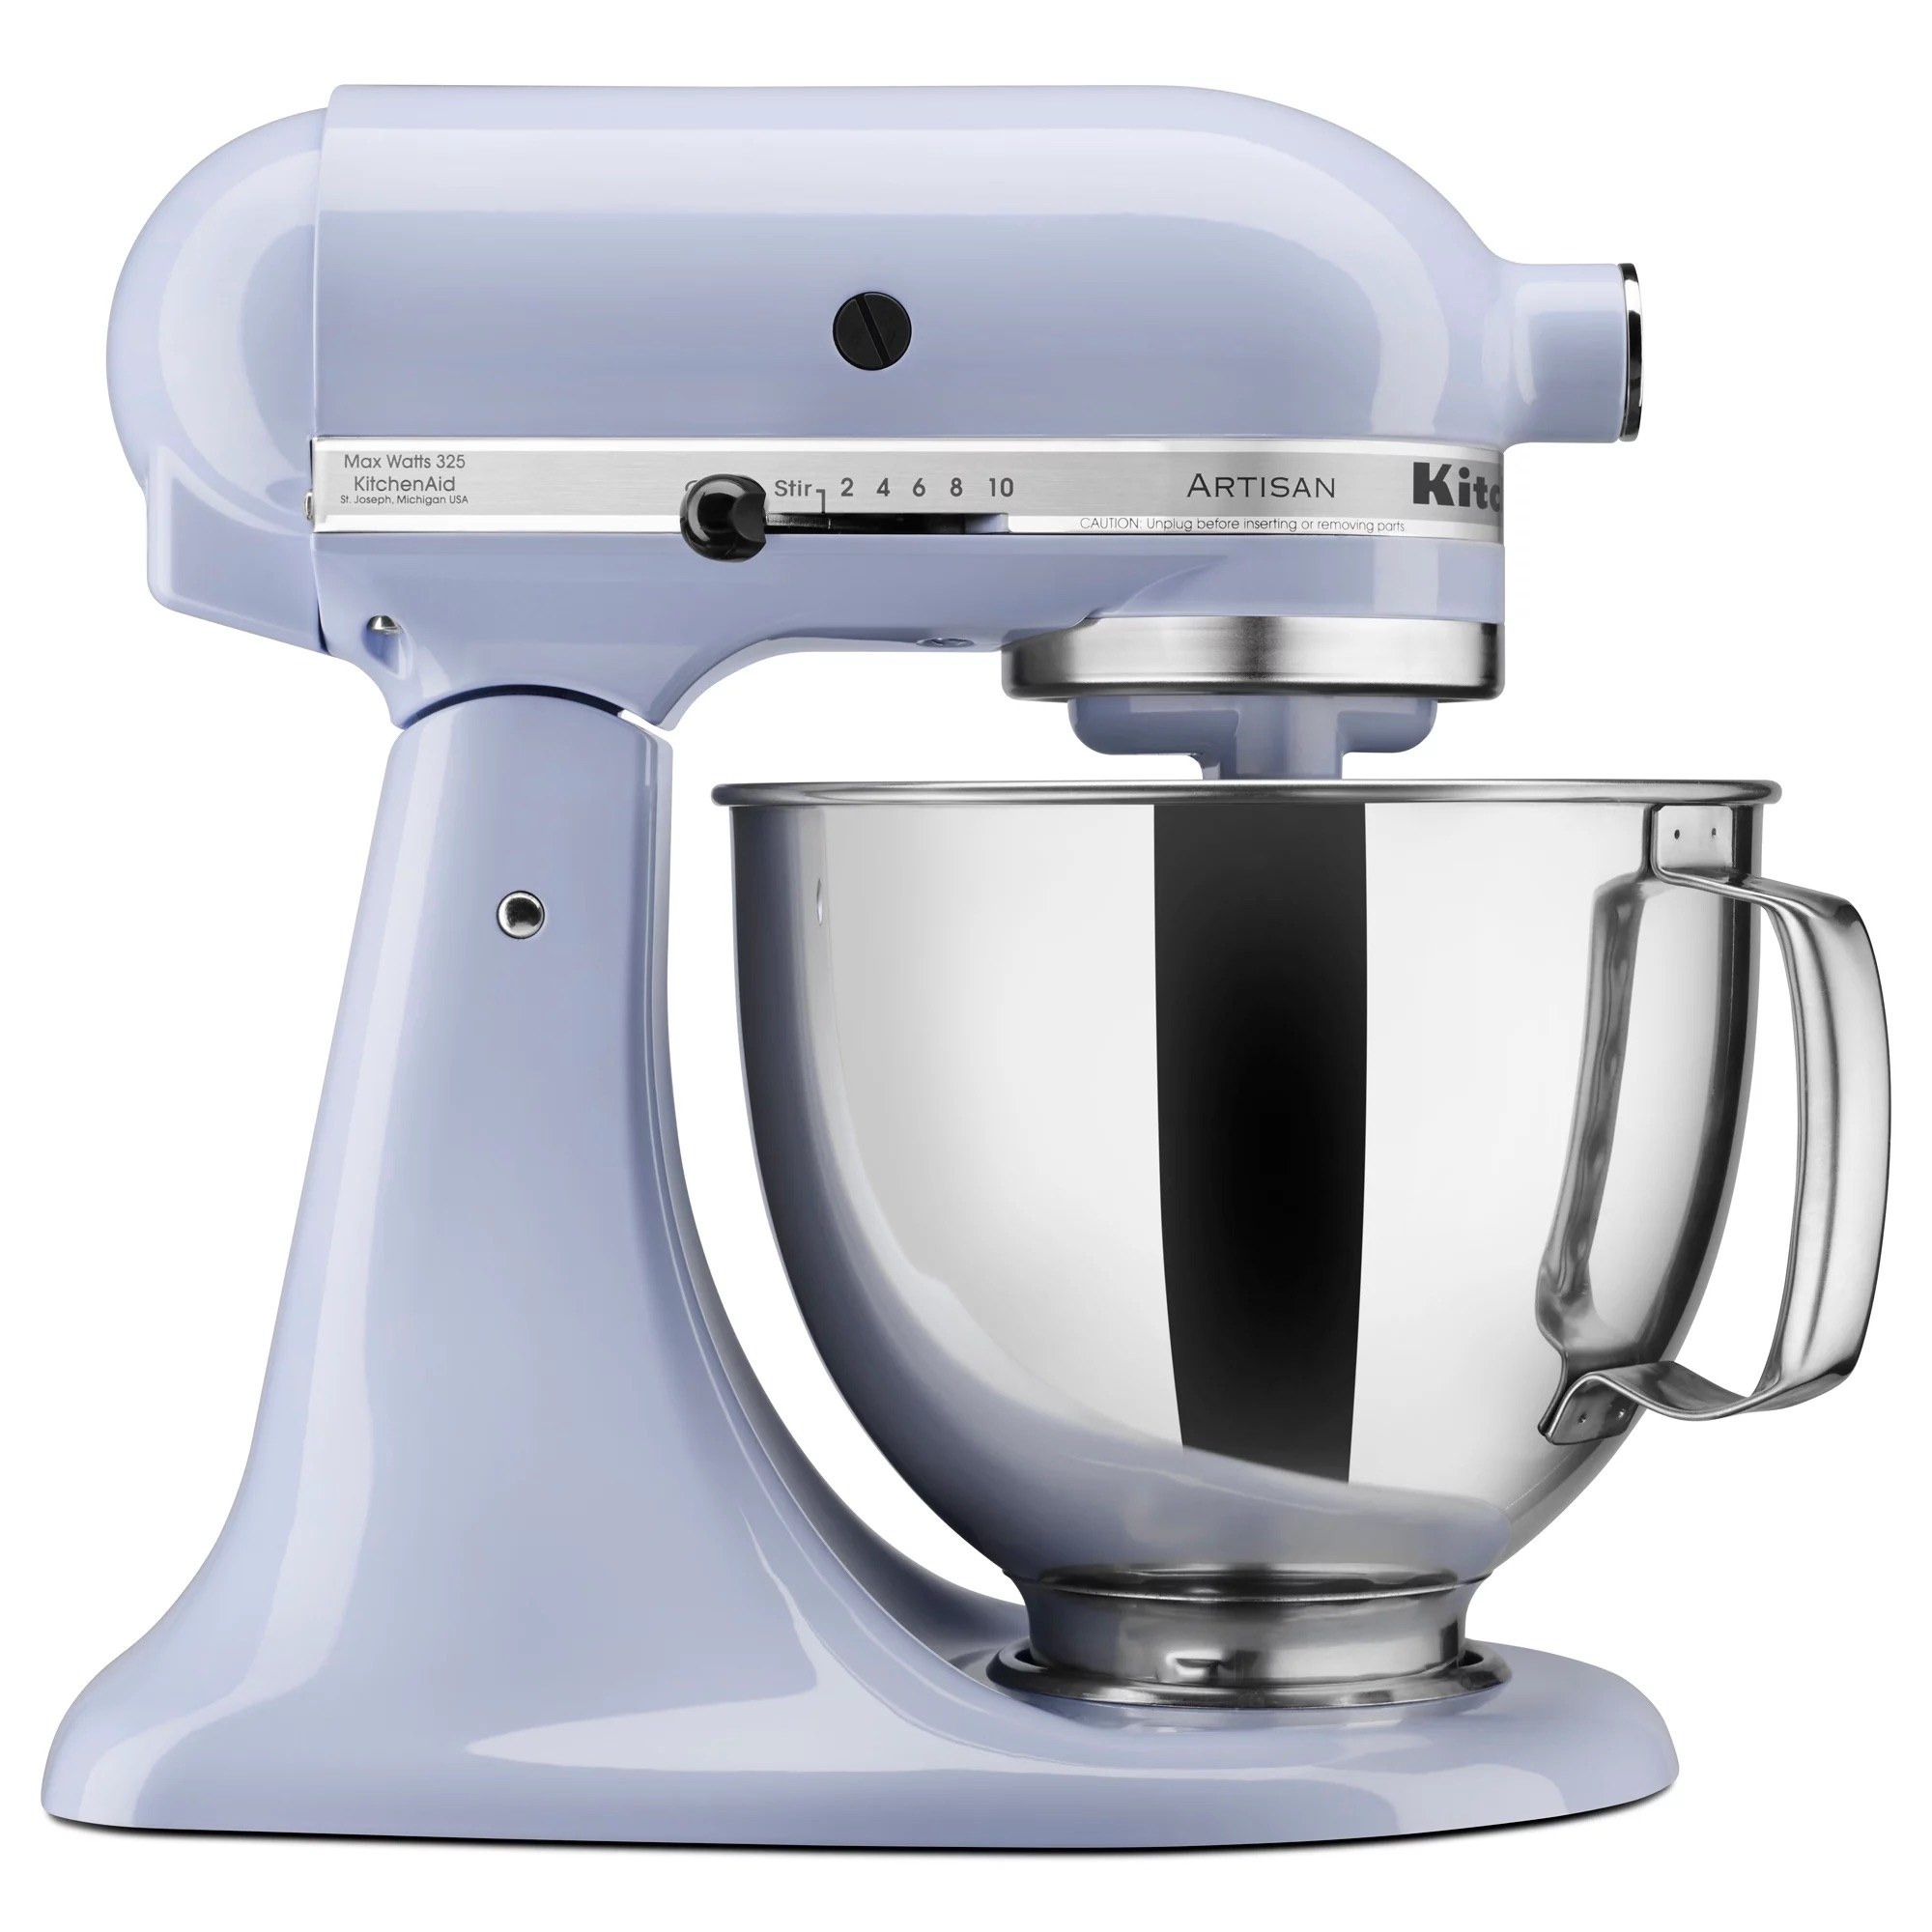 A periwinkle colored stand mixer with a silver bowl